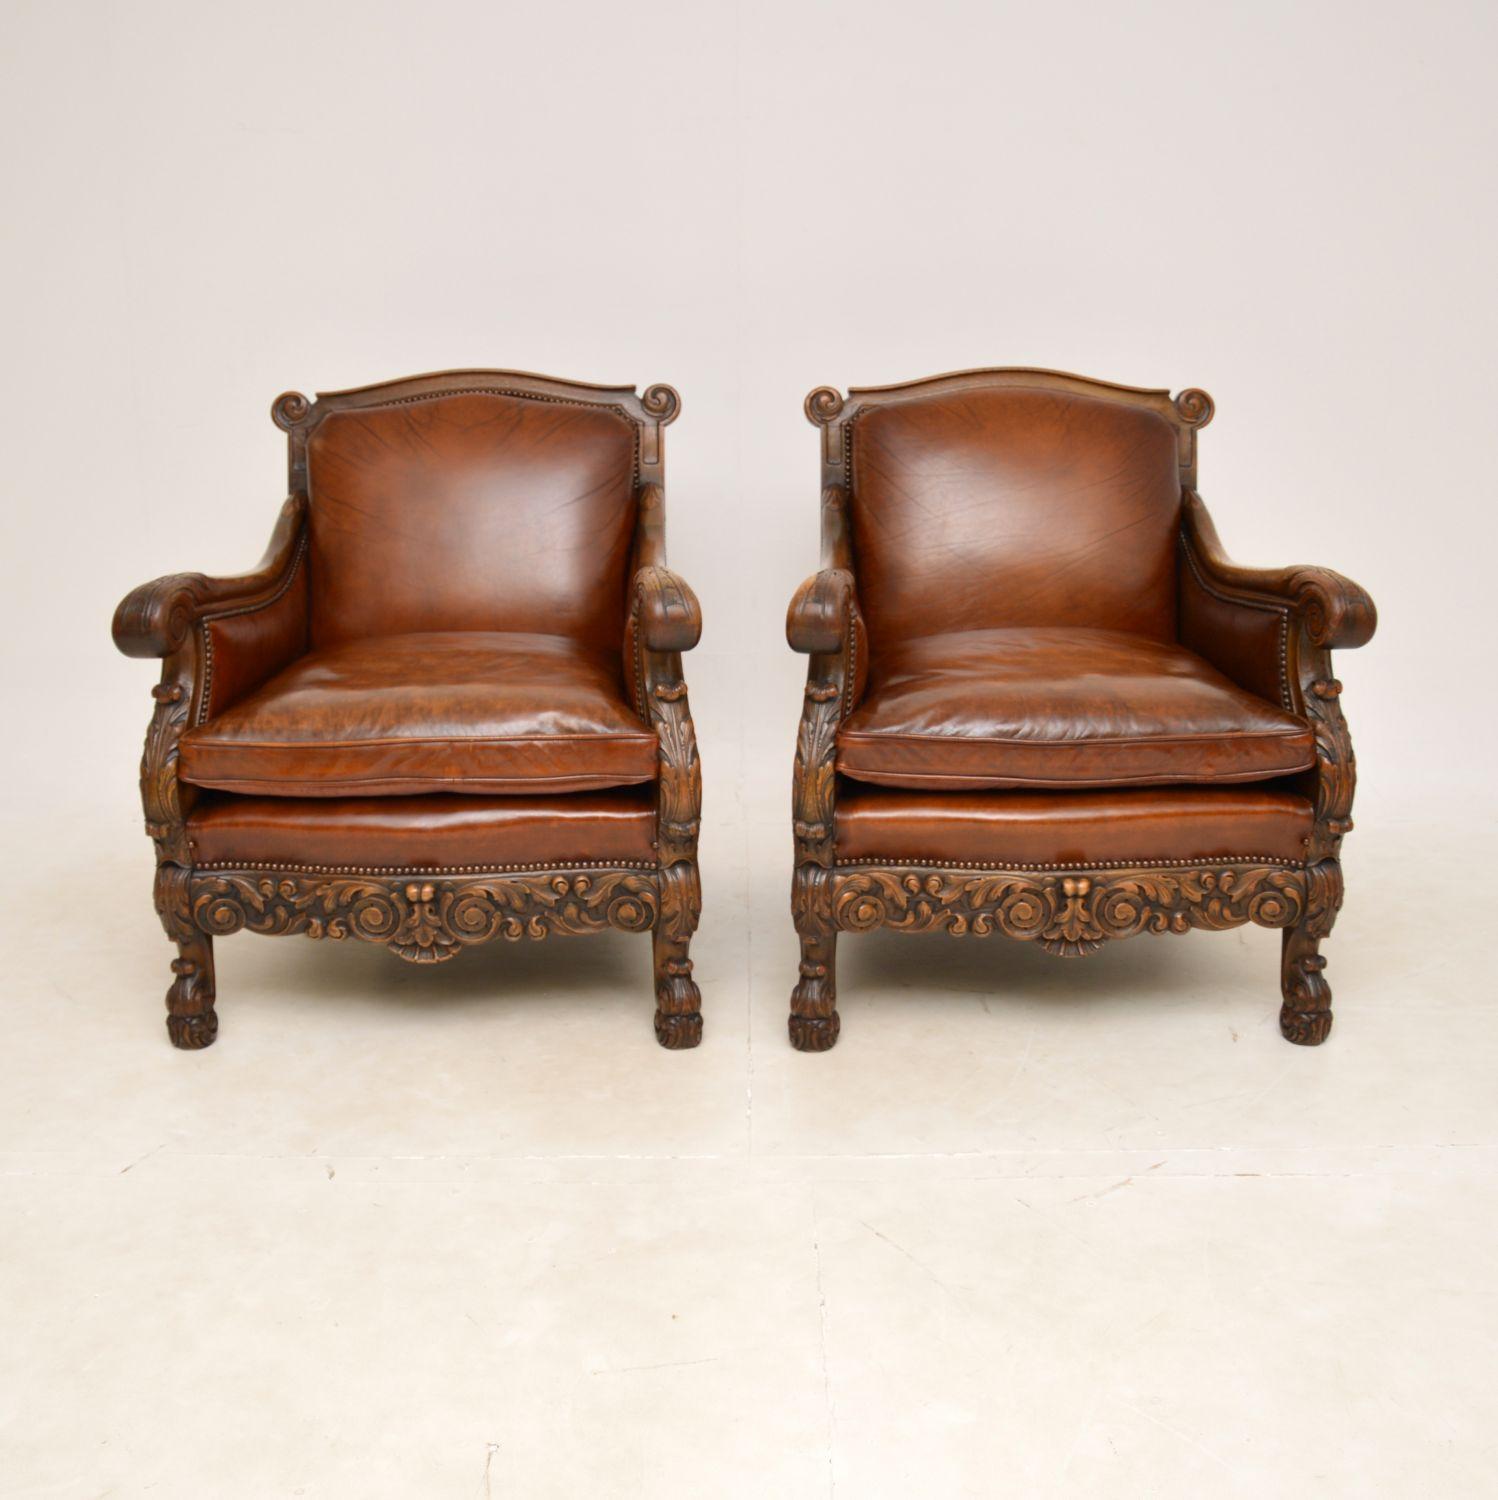 A stunning pair of antique Swedish leather bergere armchairs. They were recently imported from Sweden, they date from around the 1890-1910 period.

The quality is outstanding, they are extremely comfortable and well built. The solid oak frames